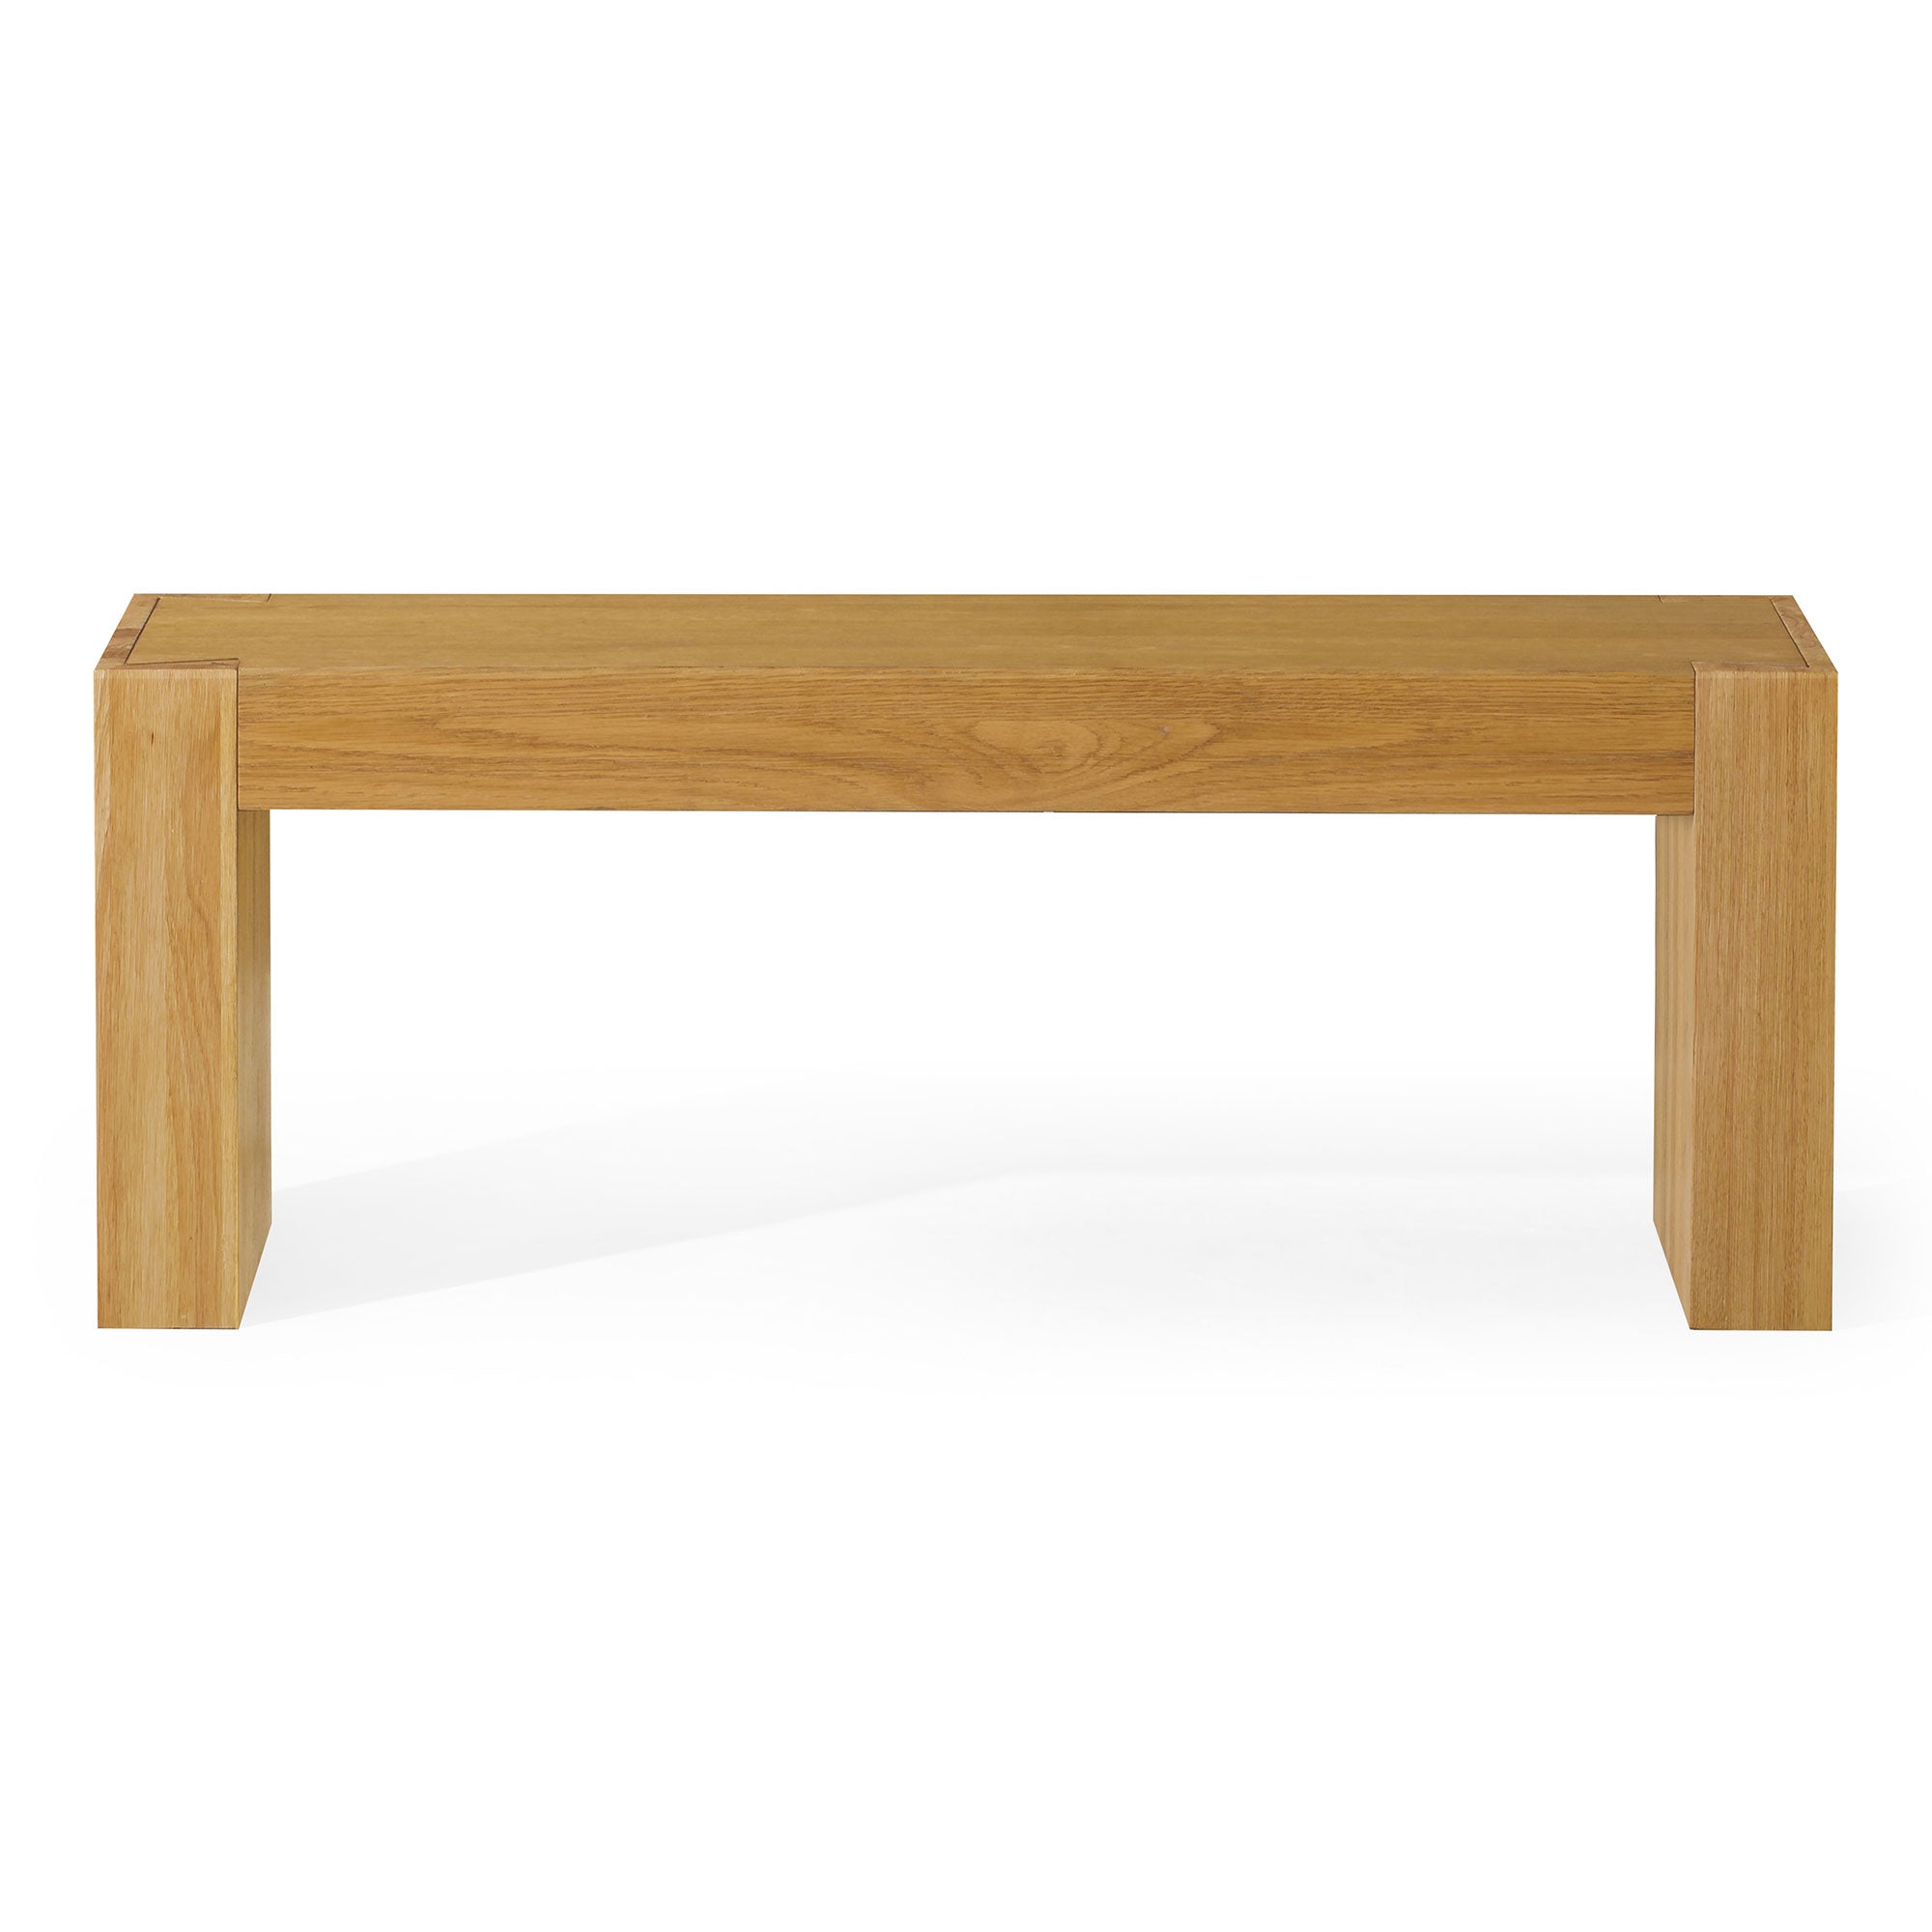 Zeno Contemporary Wooden Bench in Weathered Natural Finish